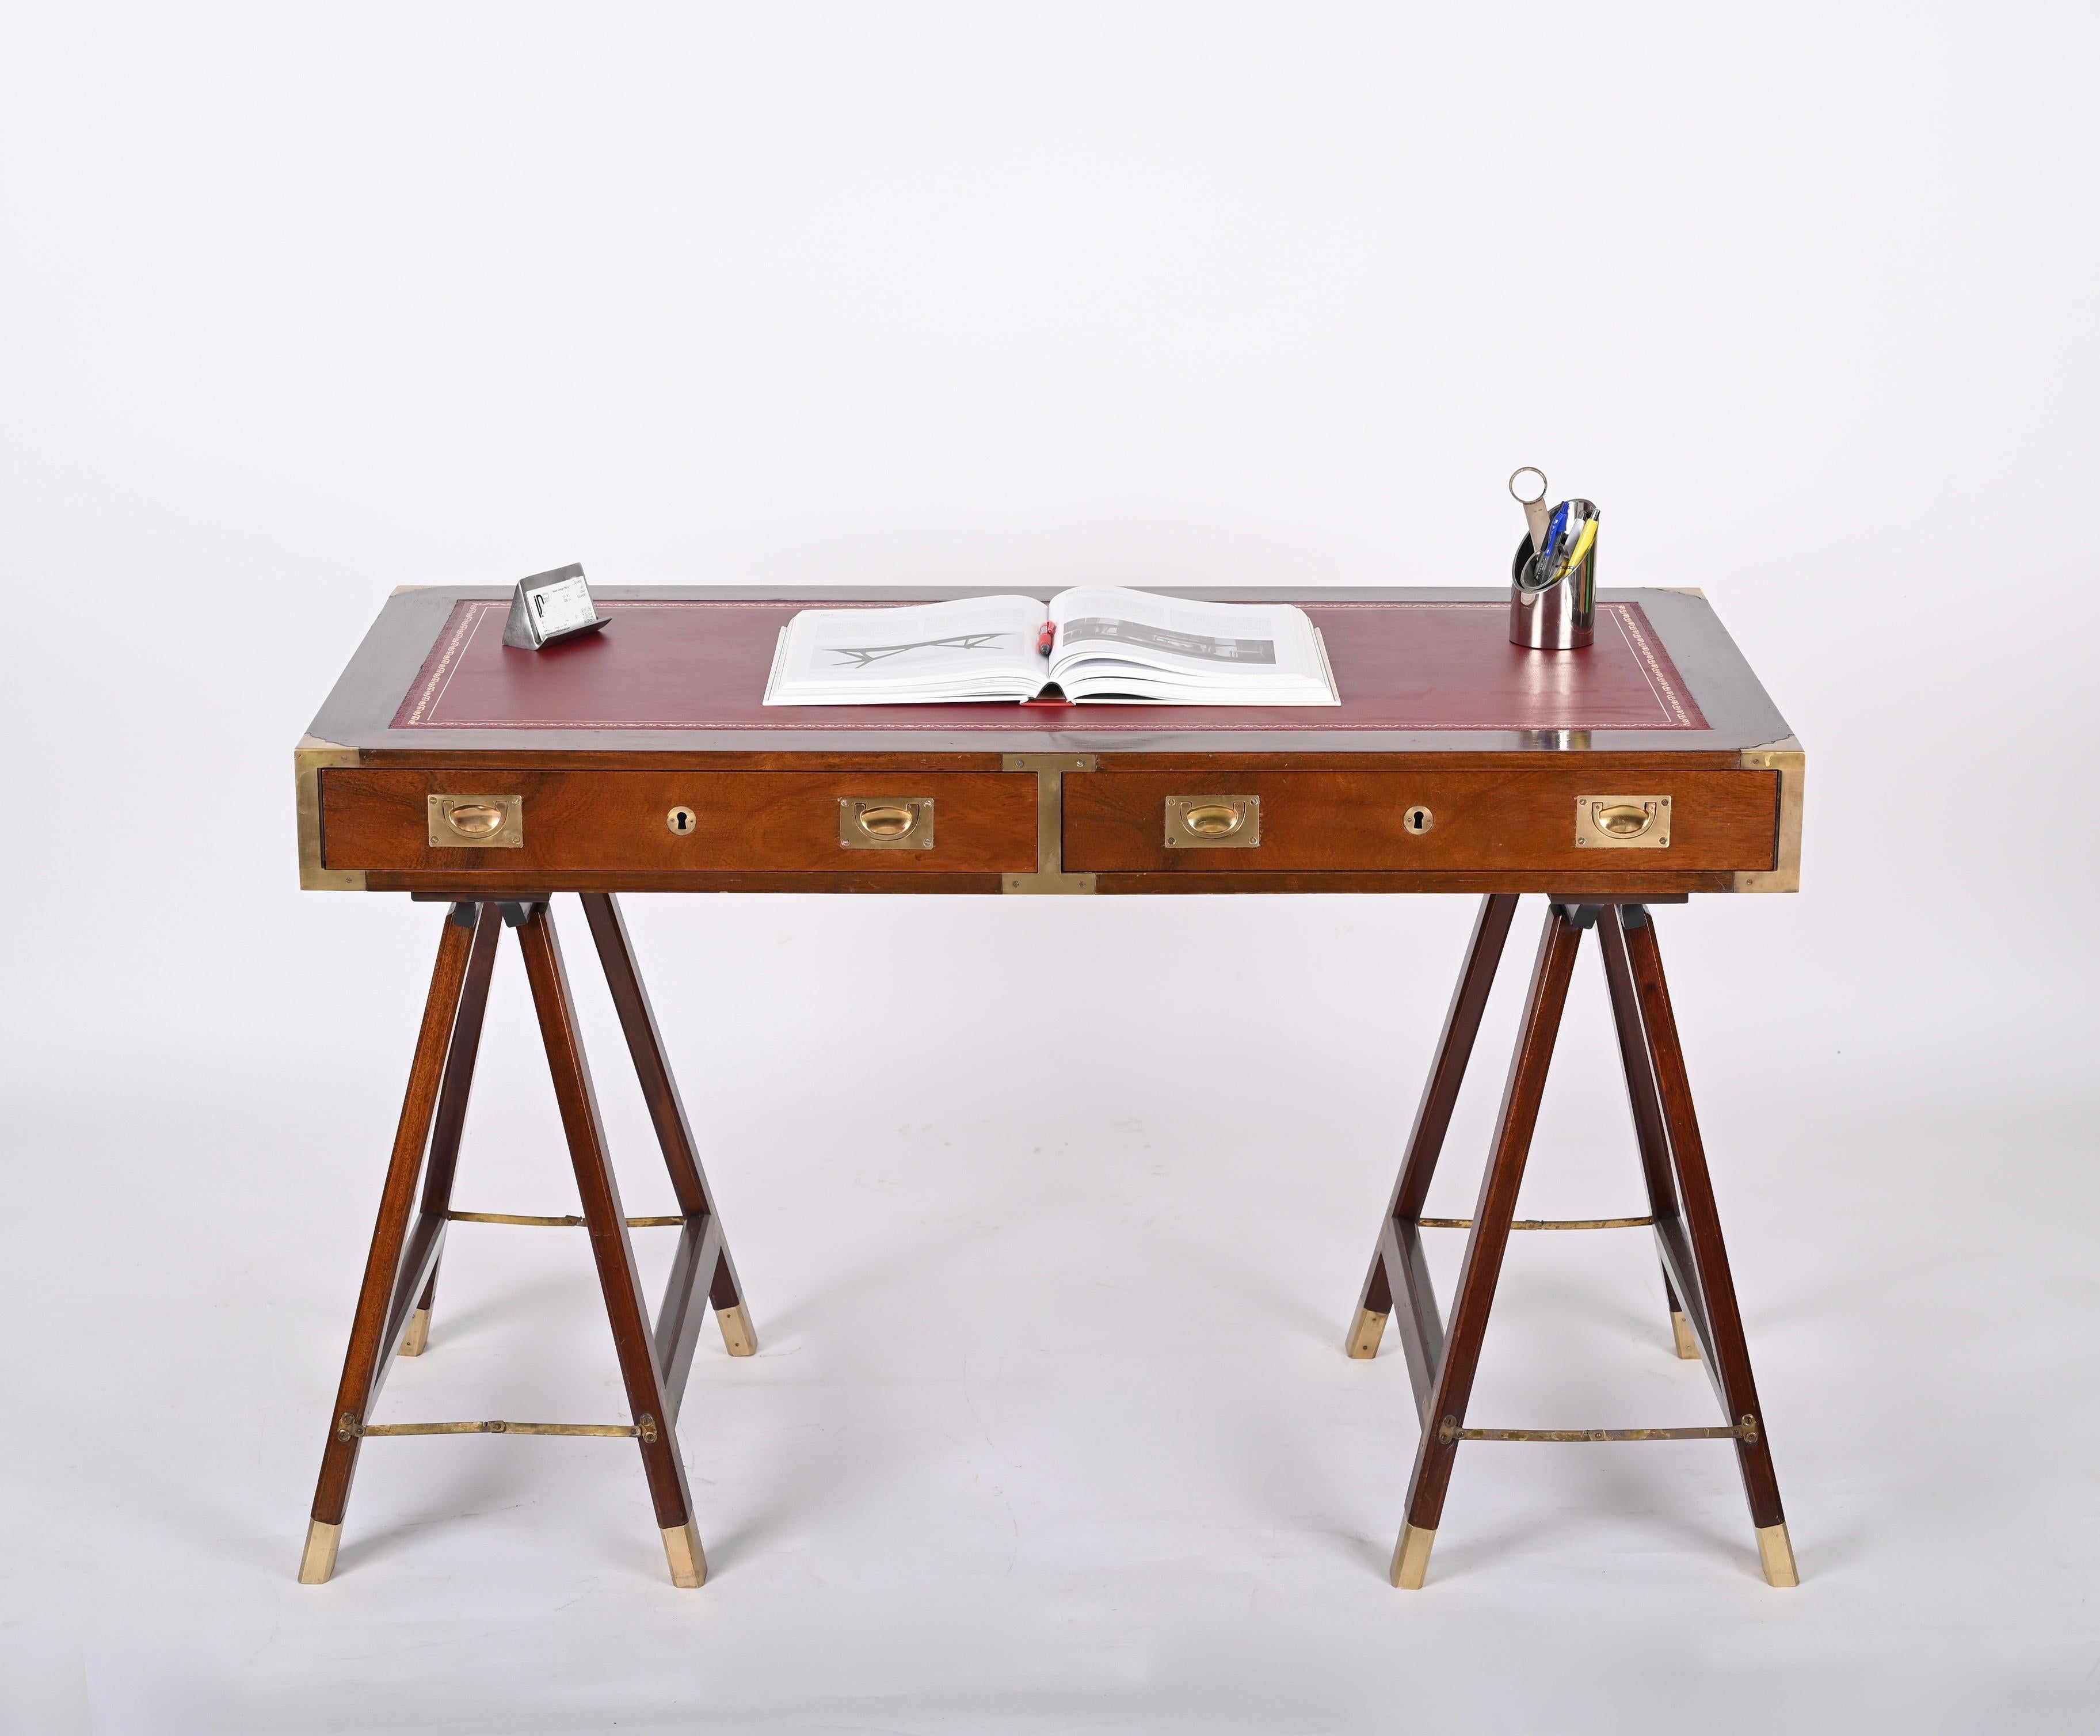 Stunning midcentury desk in Victorian military style. This piece was produced in England during the 1950s-1960s. 
The desk is made in  walnut wood, the top is decorated with a beautiful red leather enriched by gilded ornaments. and brass finishes.